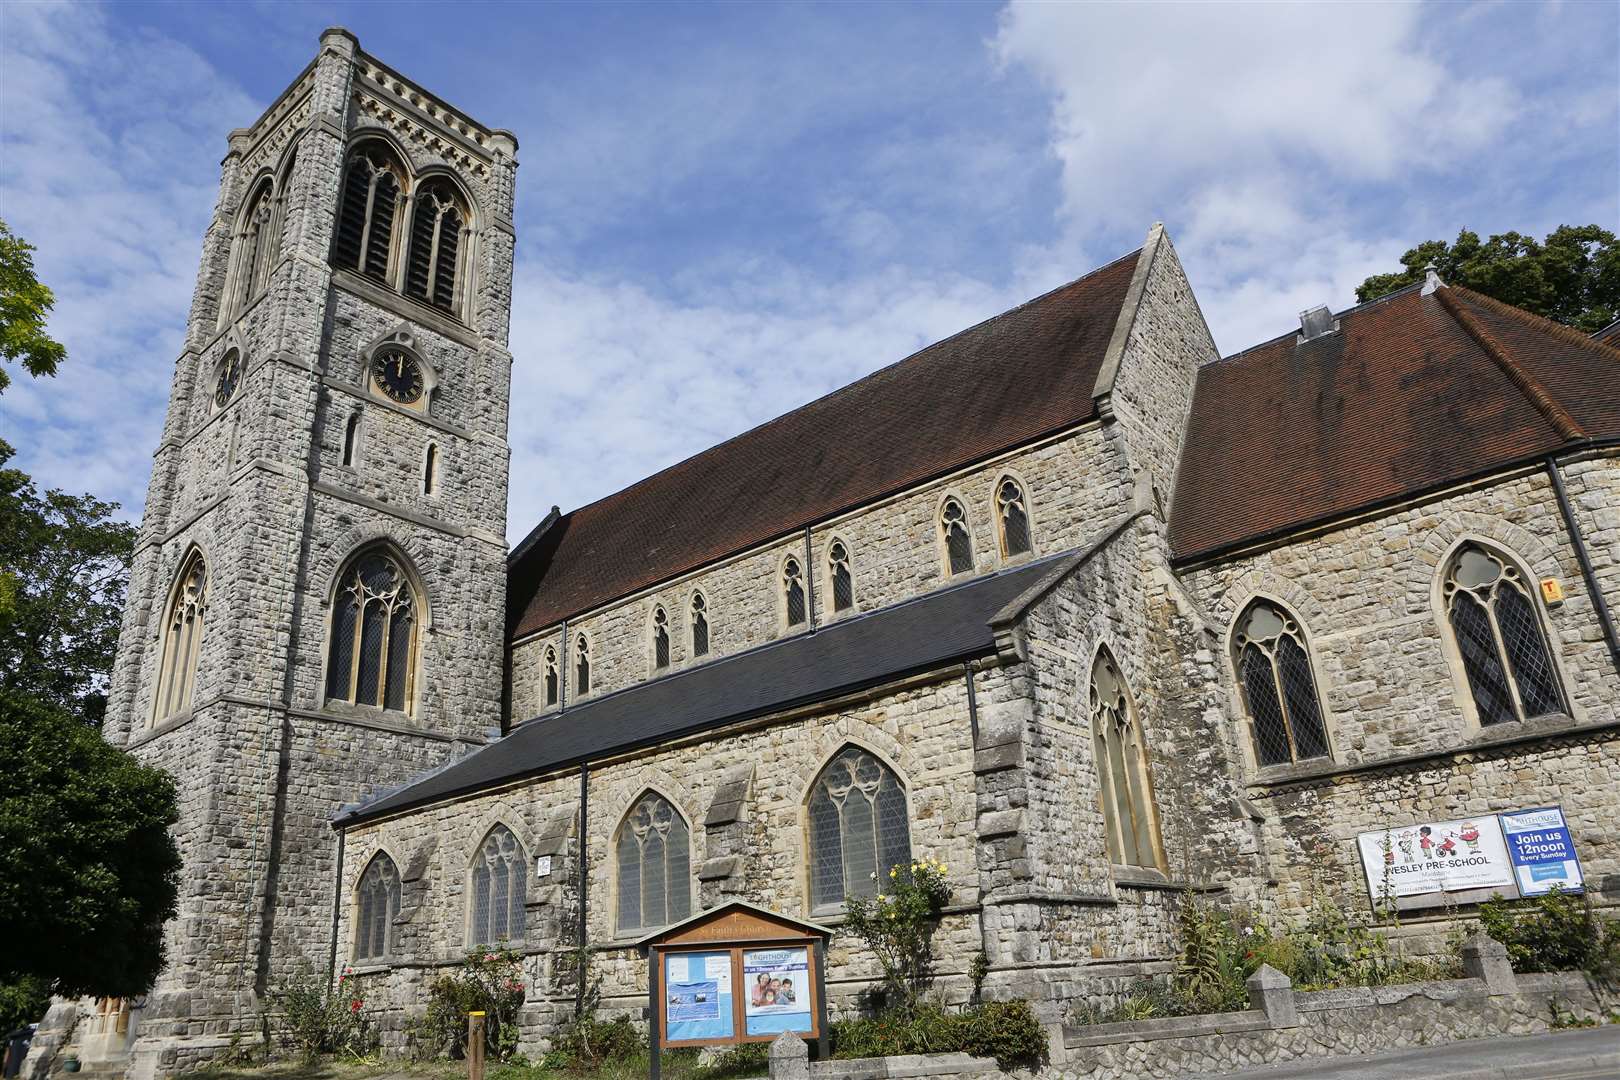 St Faith's Church is to be sold to another church group